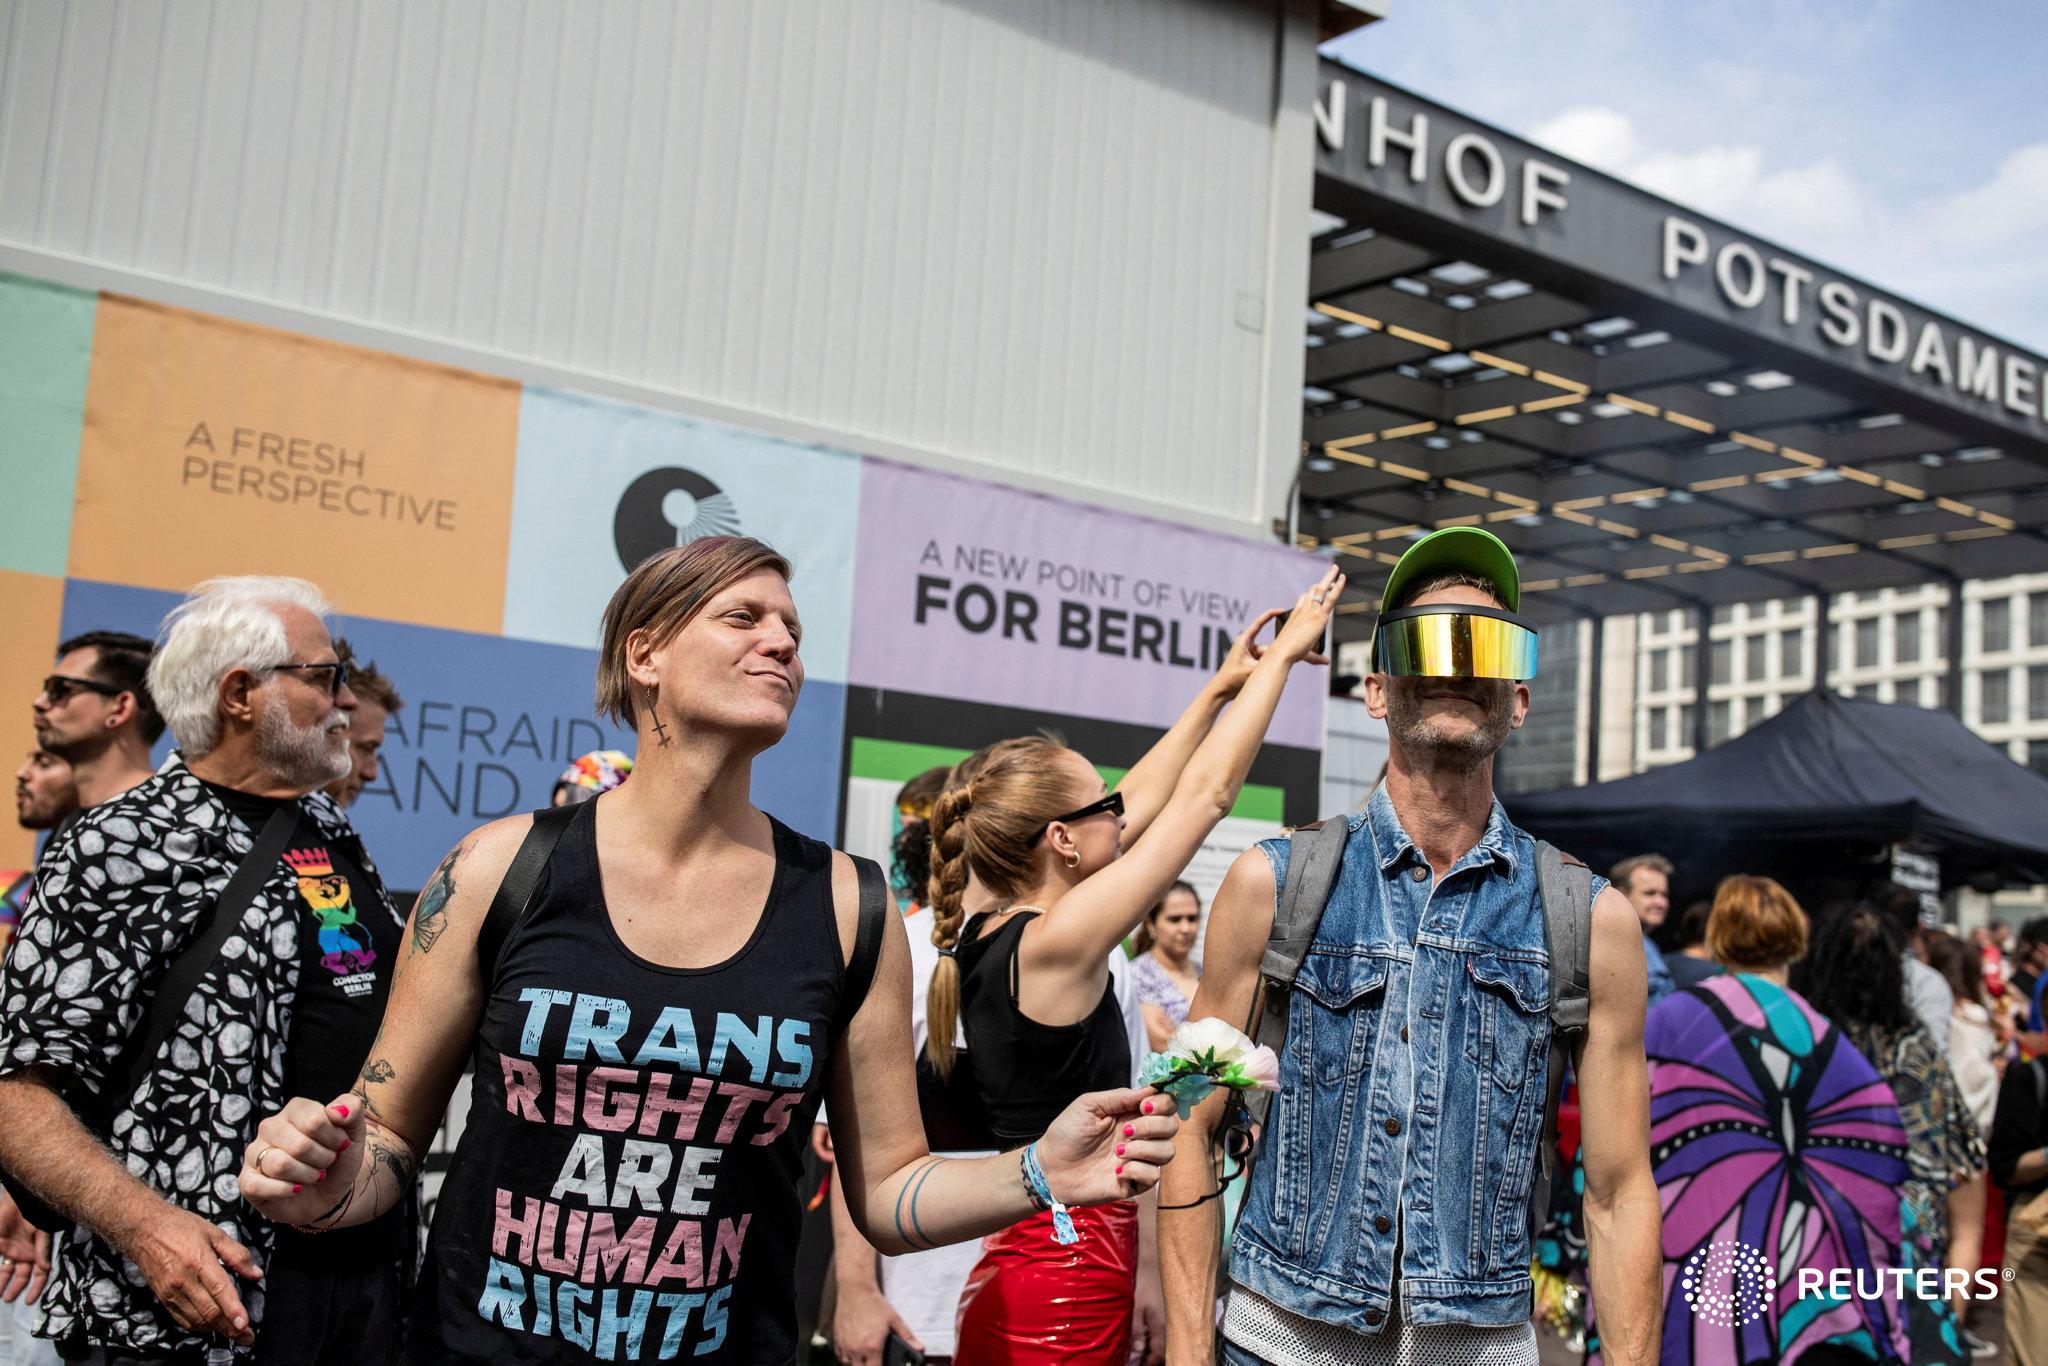 German LGBTQ activist warns over 'worrying' hate crime rise for REUTERS